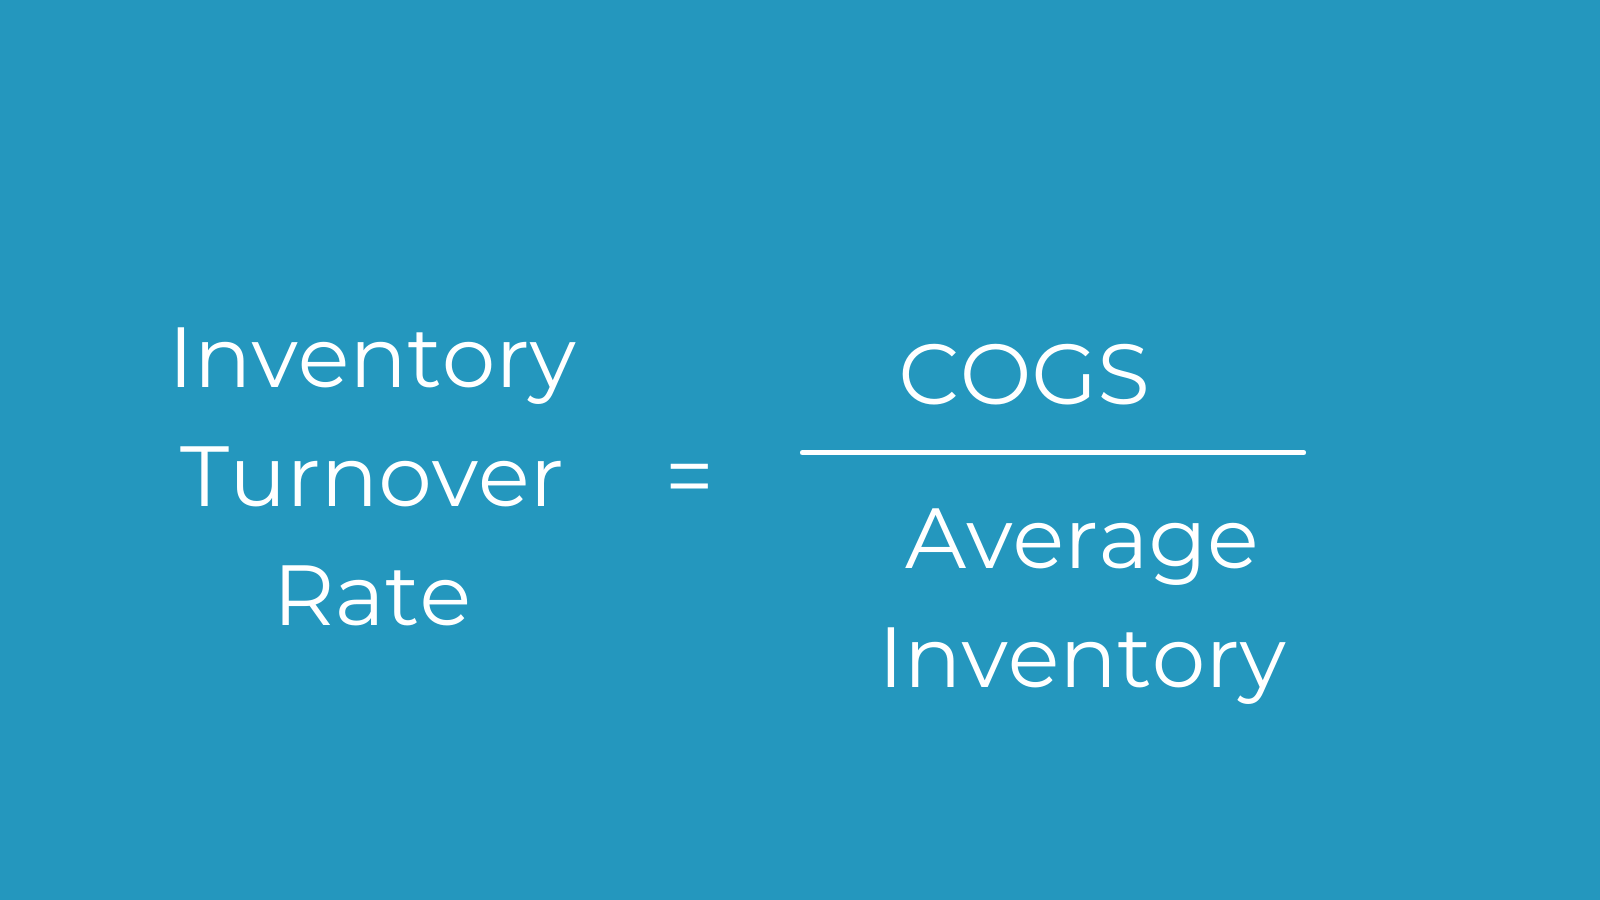 Inventory Turnover Rate Graphic